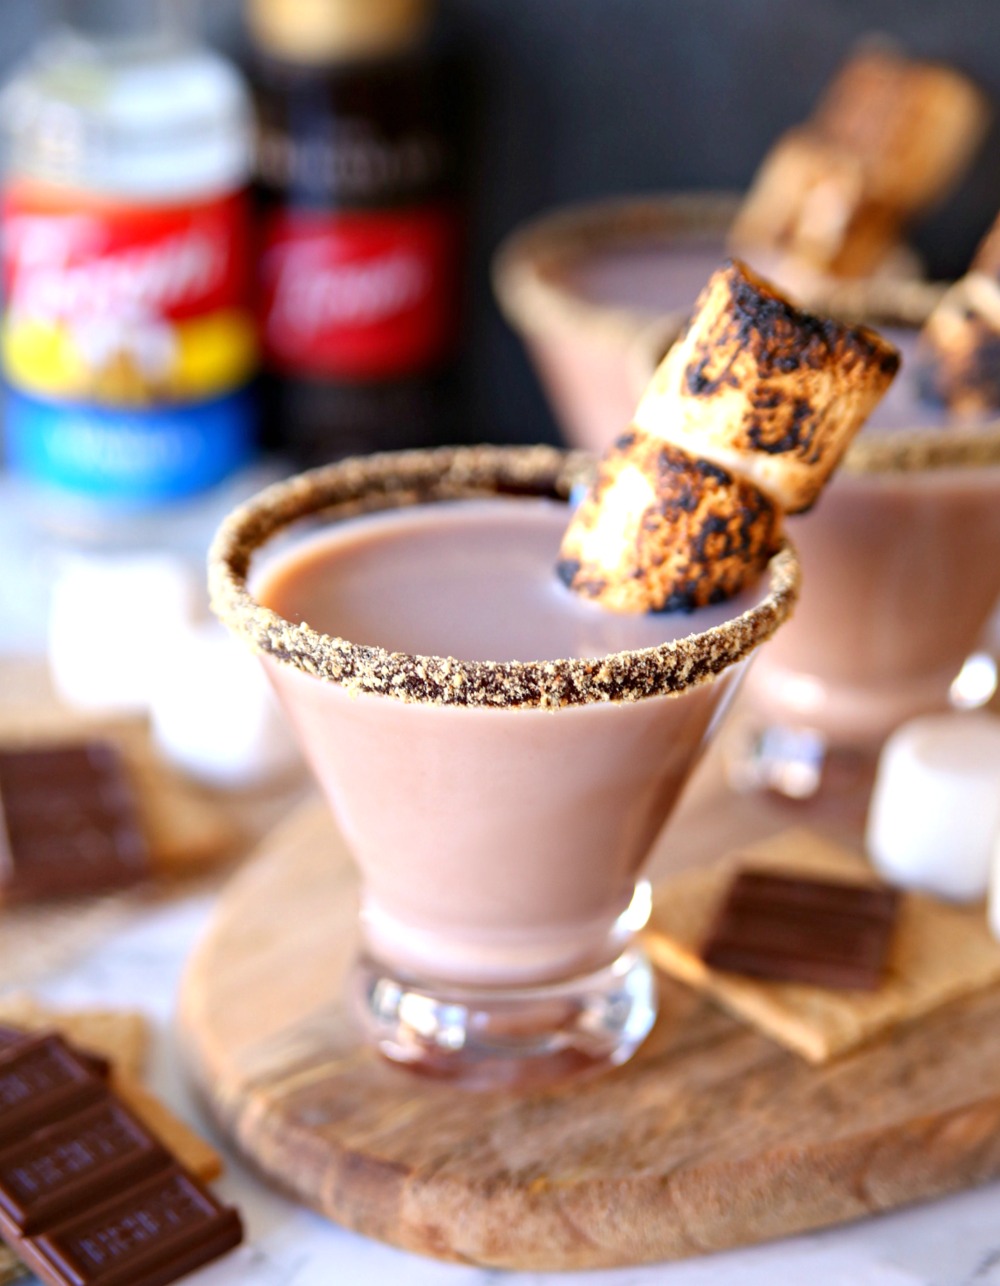 Toasted S'mores Martini Cocktail Recipe with toasted marshmallows, chocolate liquor, and crushed graham crackers.